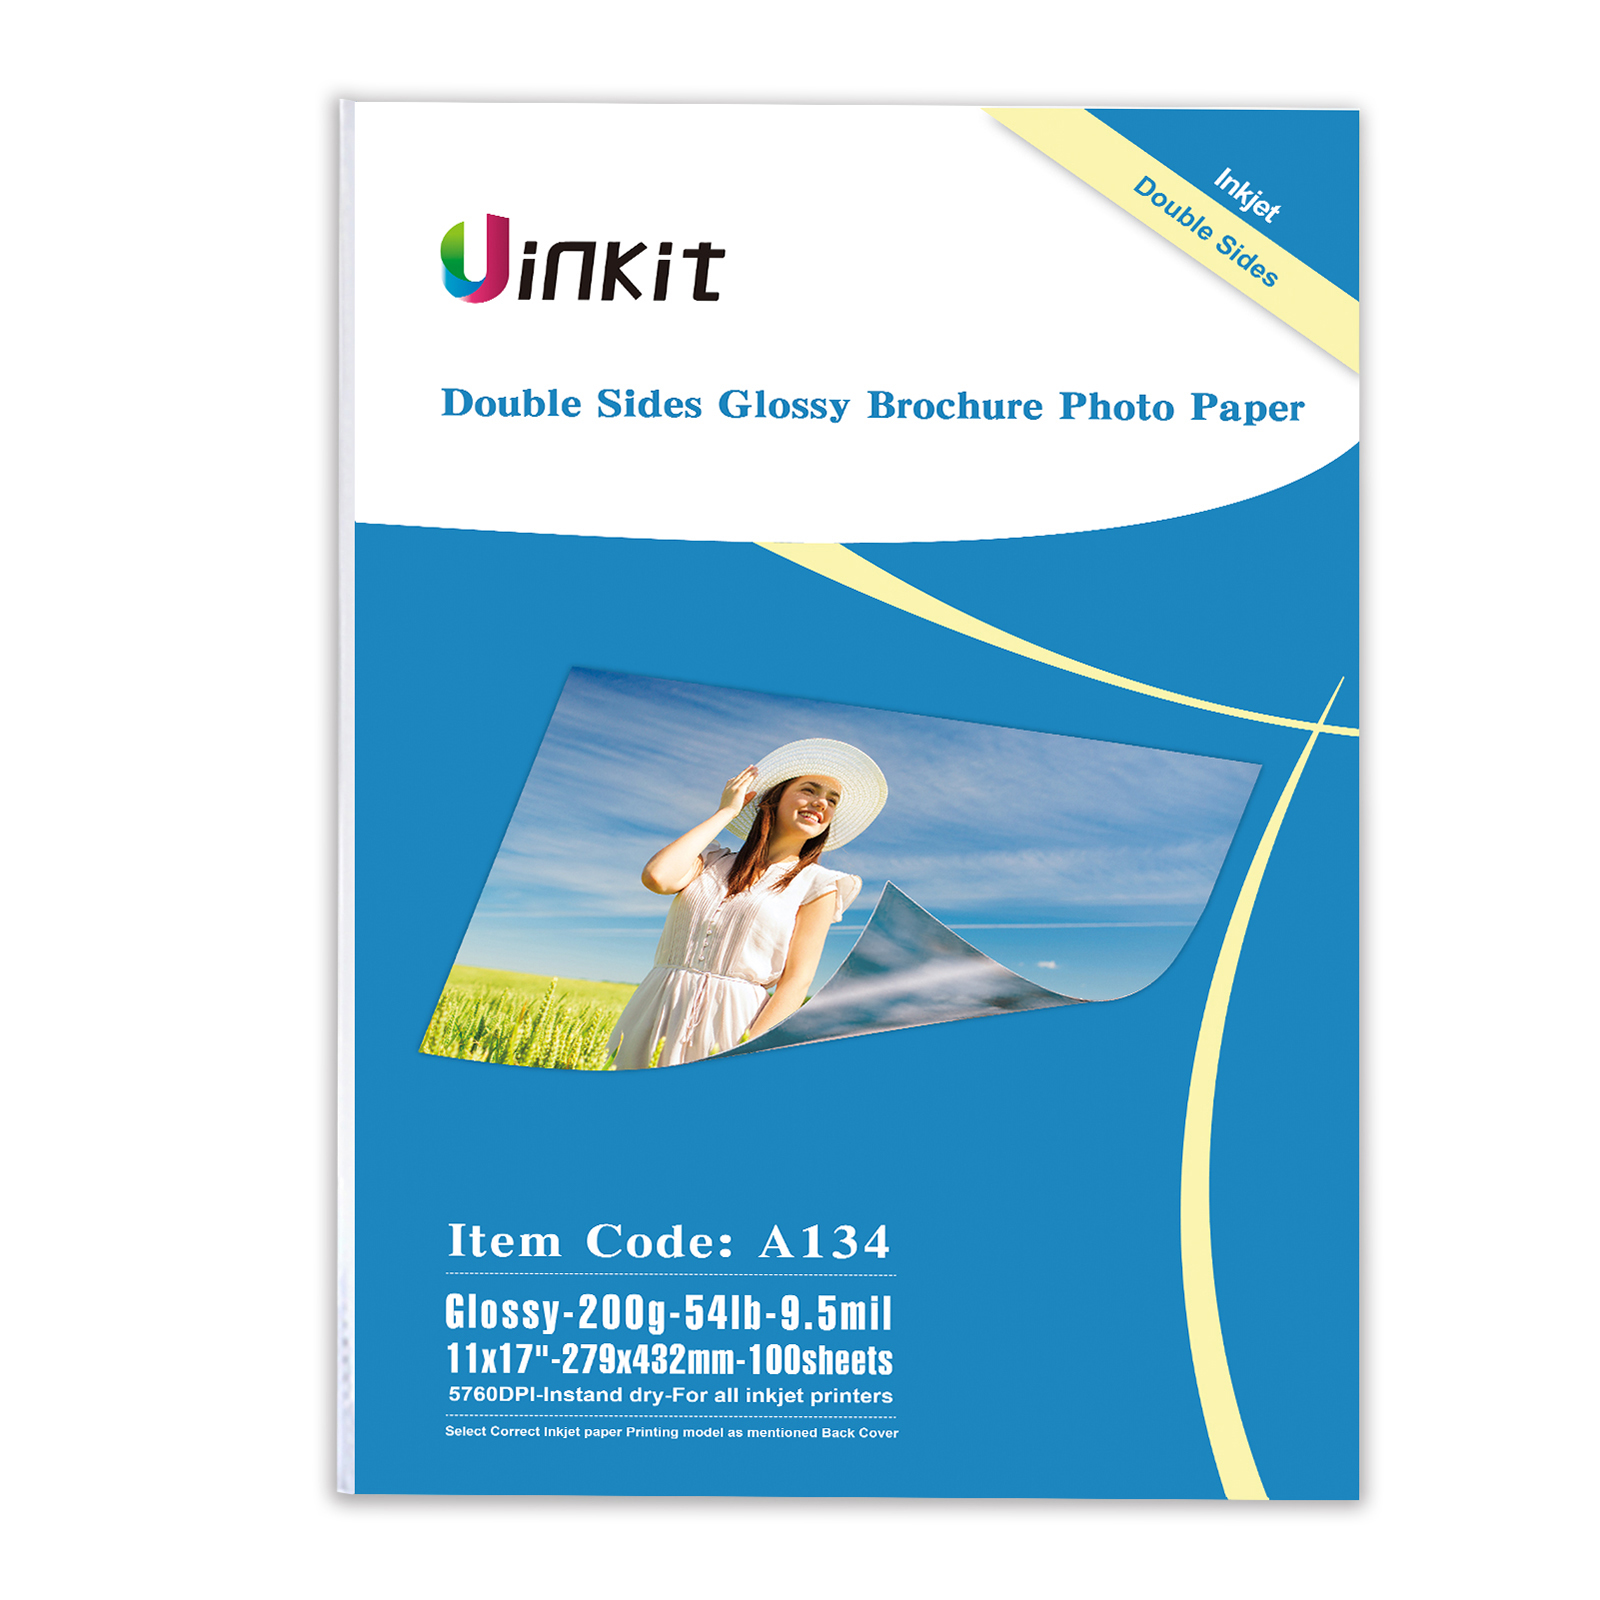 Uinkit 100Sheets Double Sided Glossy Photo Paper Inkjet 8.5x11 53lb 200gsm  A134